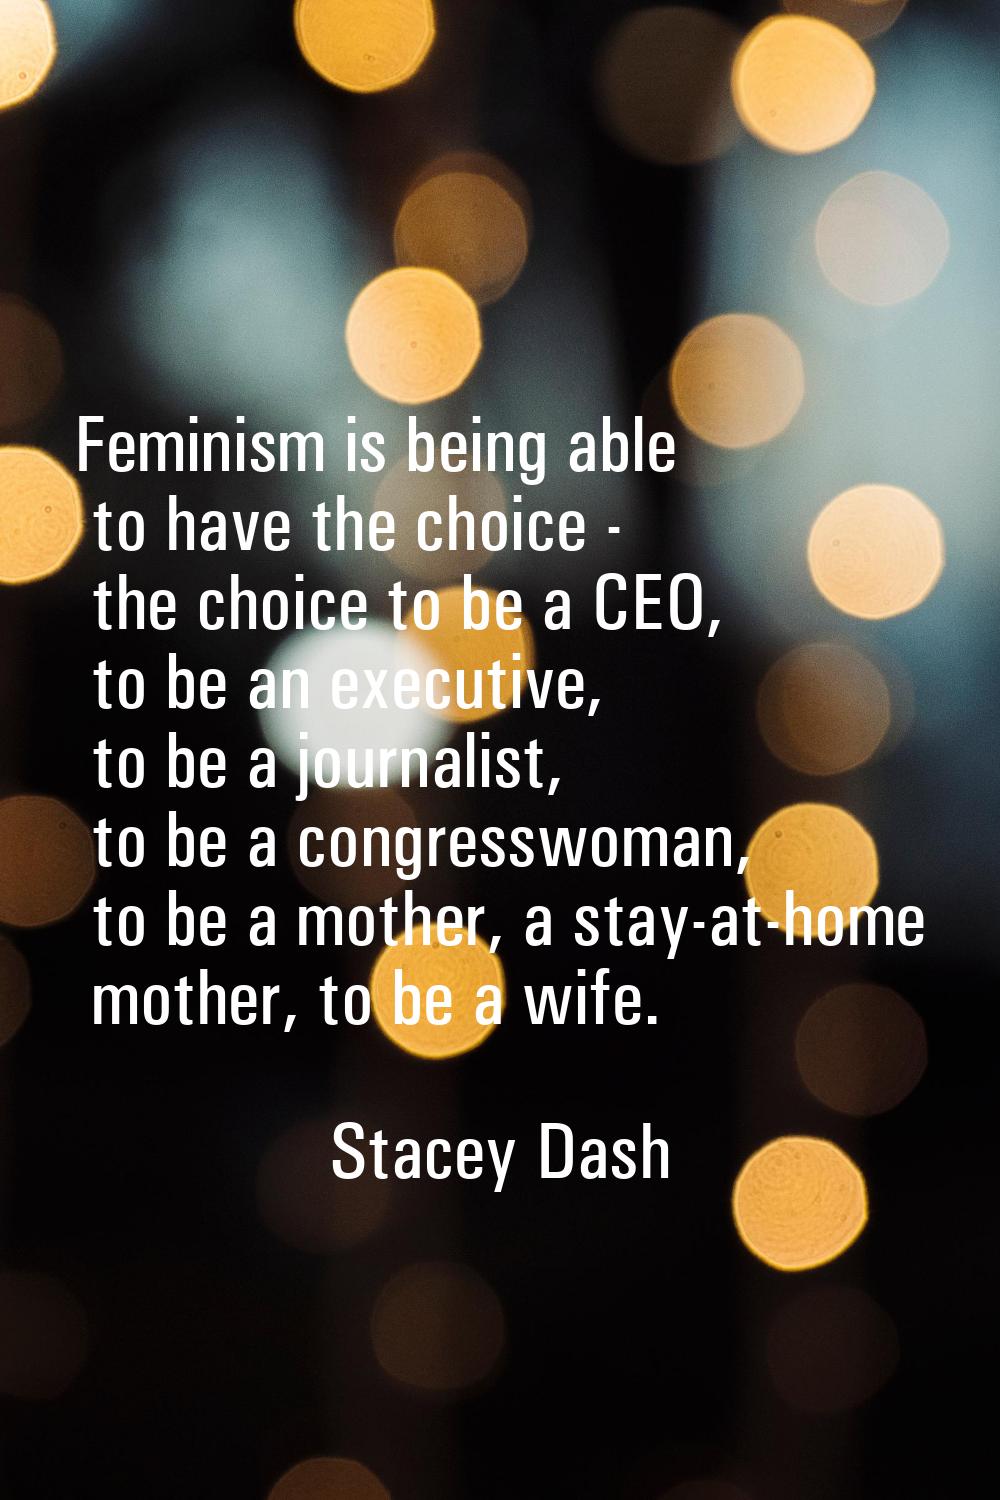 Feminism is being able to have the choice - the choice to be a CEO, to be an executive, to be a jou